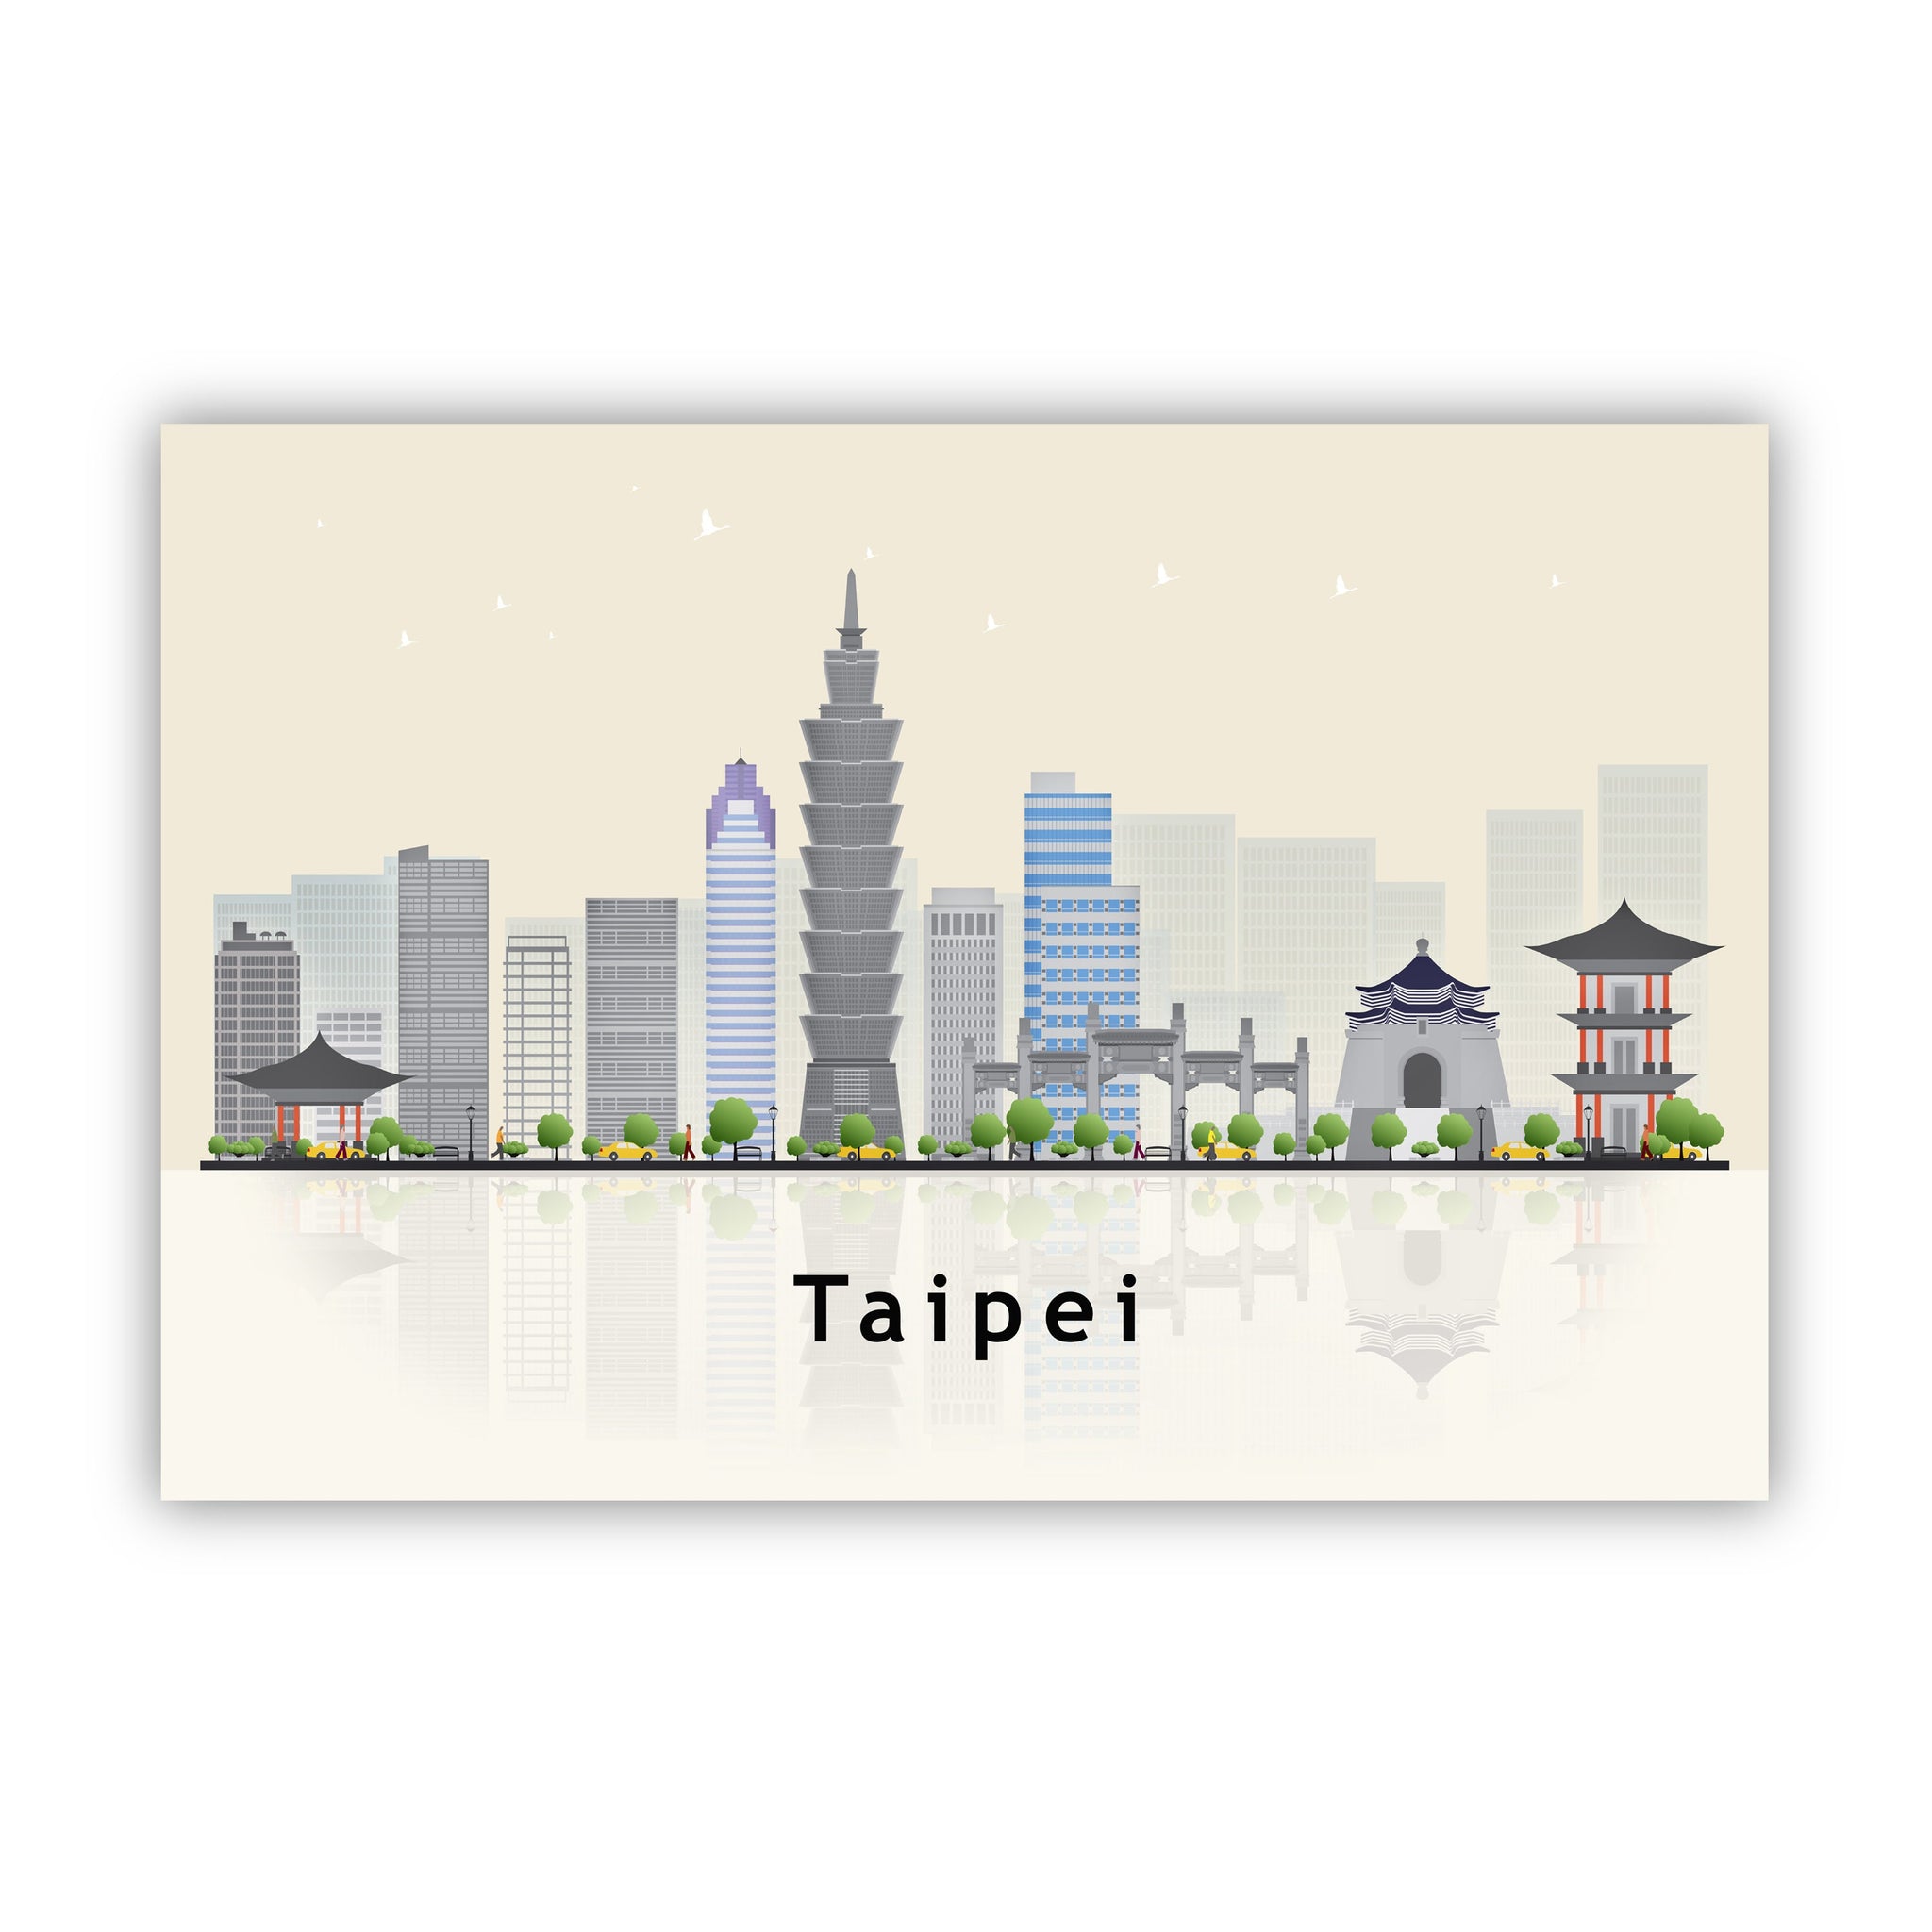 TAIPEI TAIWAN Illustration skyline poster, Modern skyline cityscape poster, Taipei city skyline landmark map poster, Home wall decorations